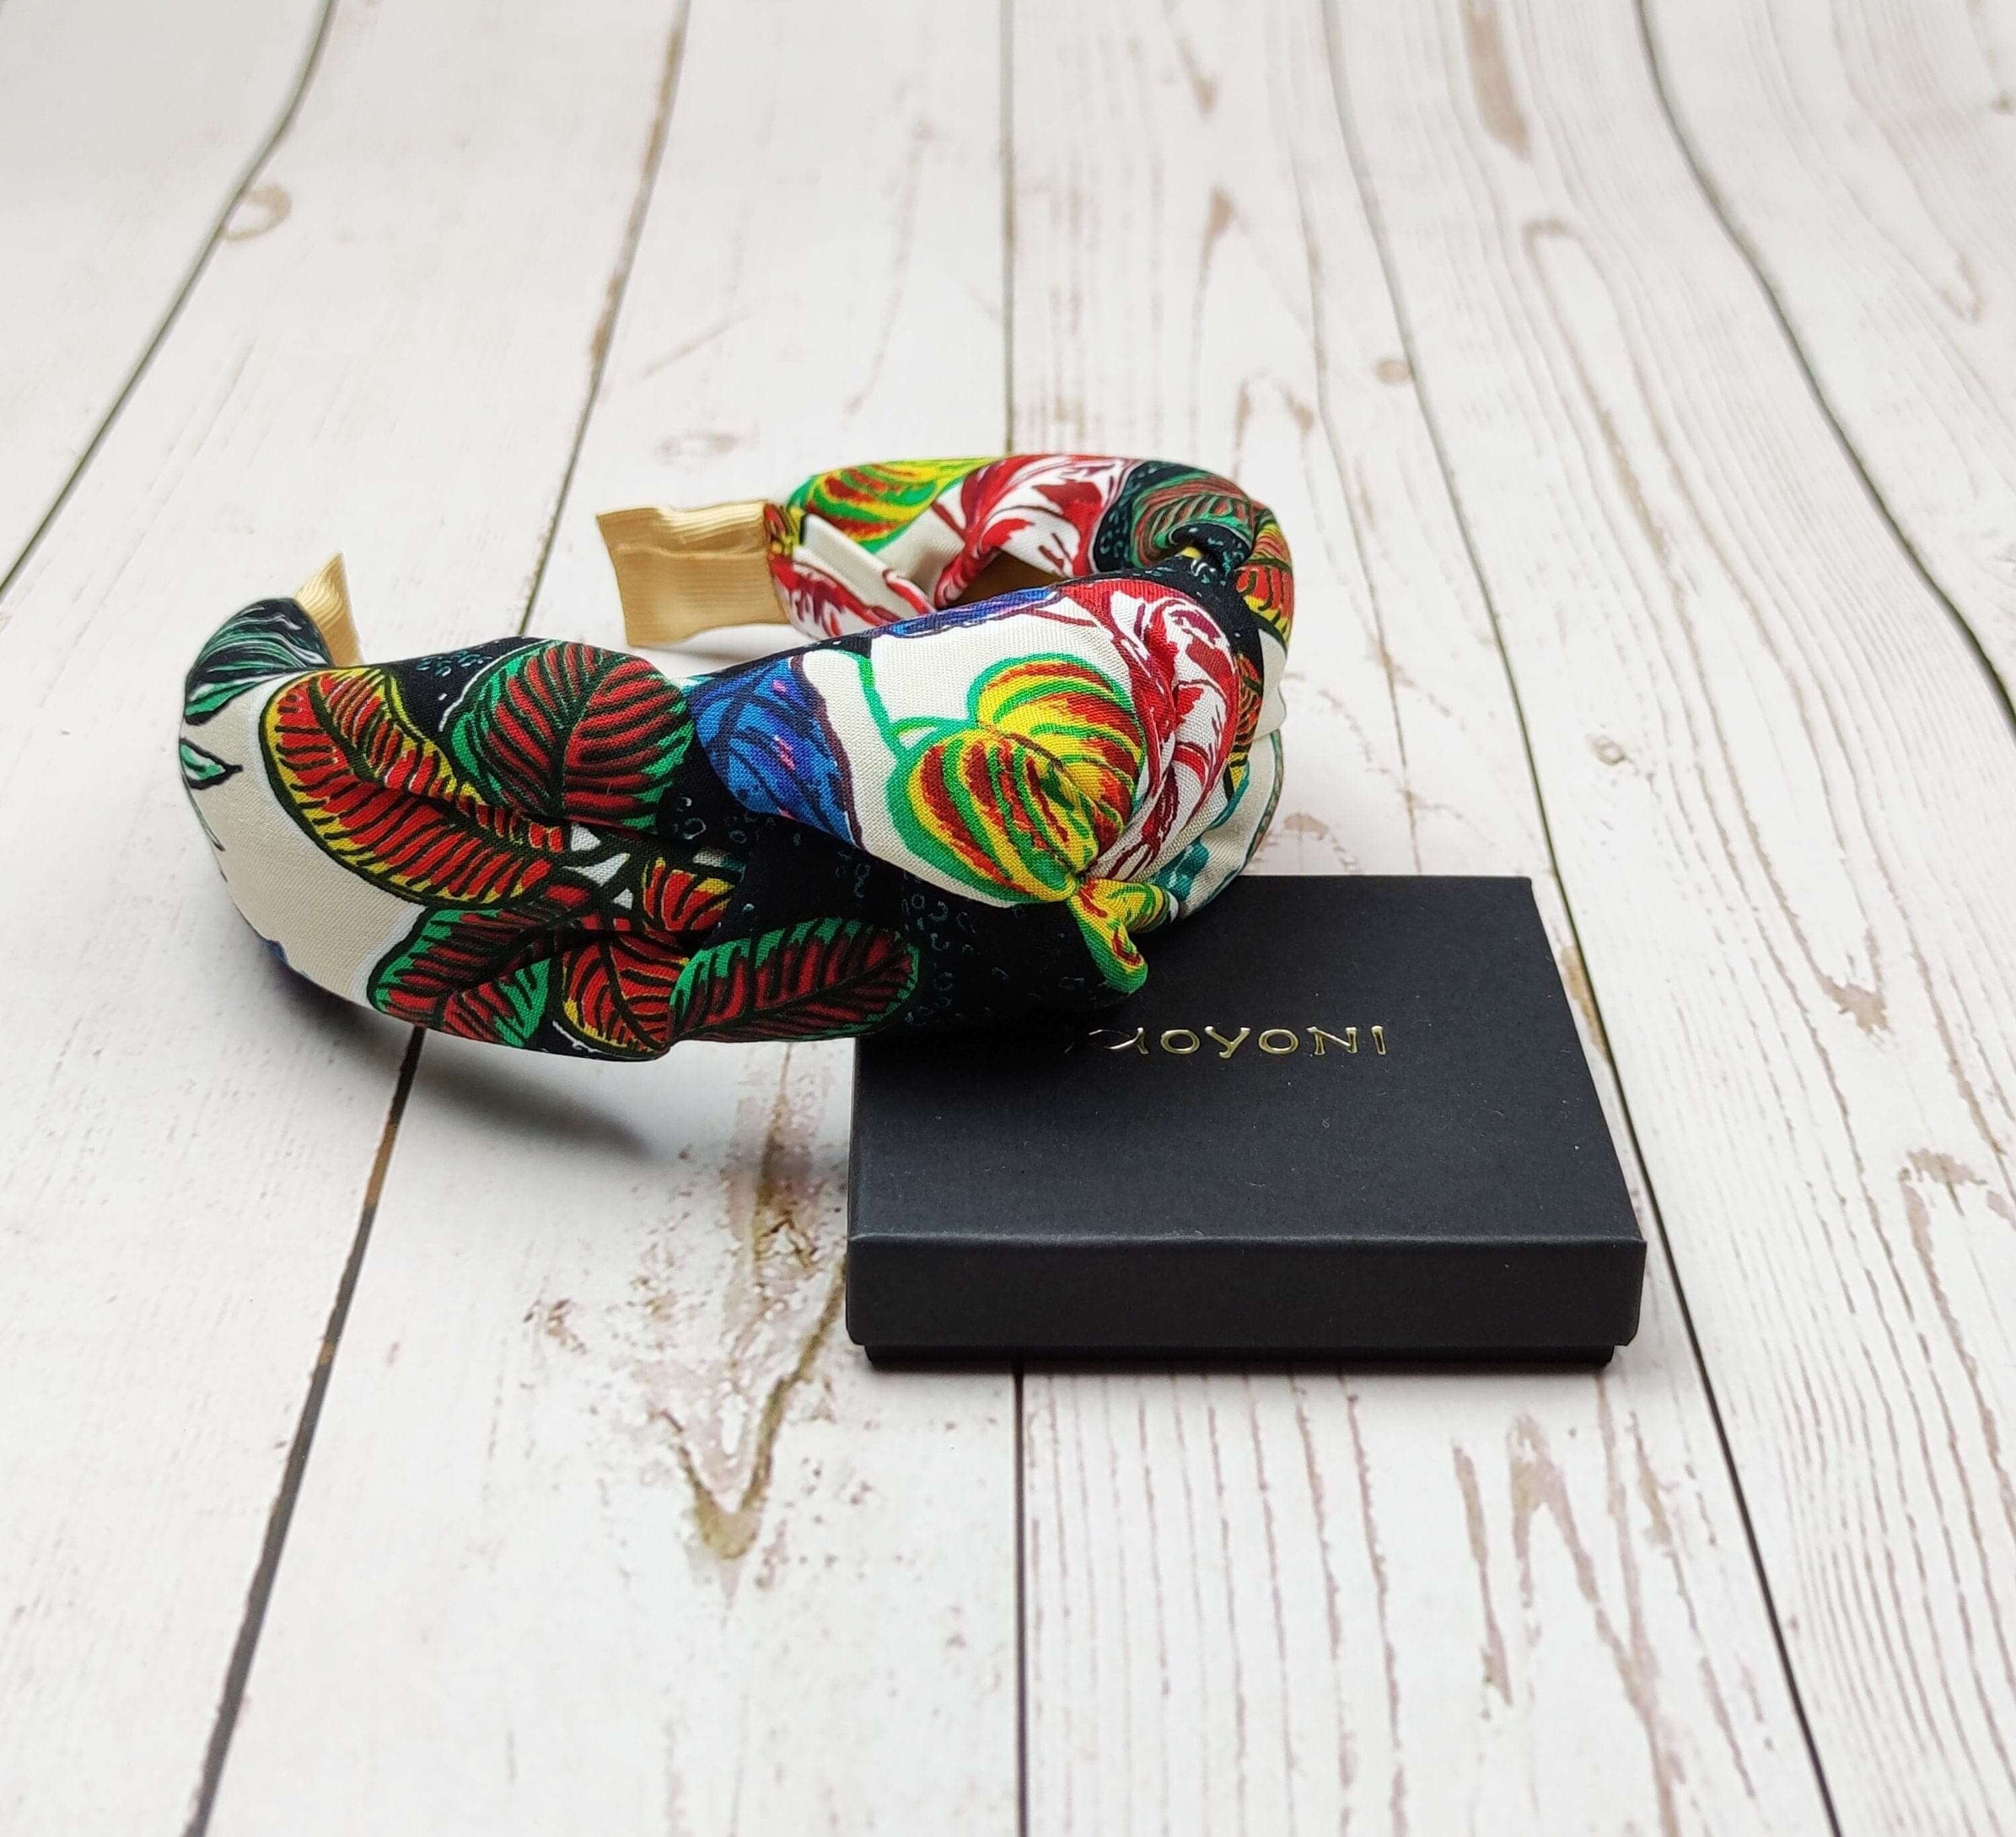 Stay stylish and comfortable with this knotted headband in a vibrant mix of dark blue, yellow, green, and red.